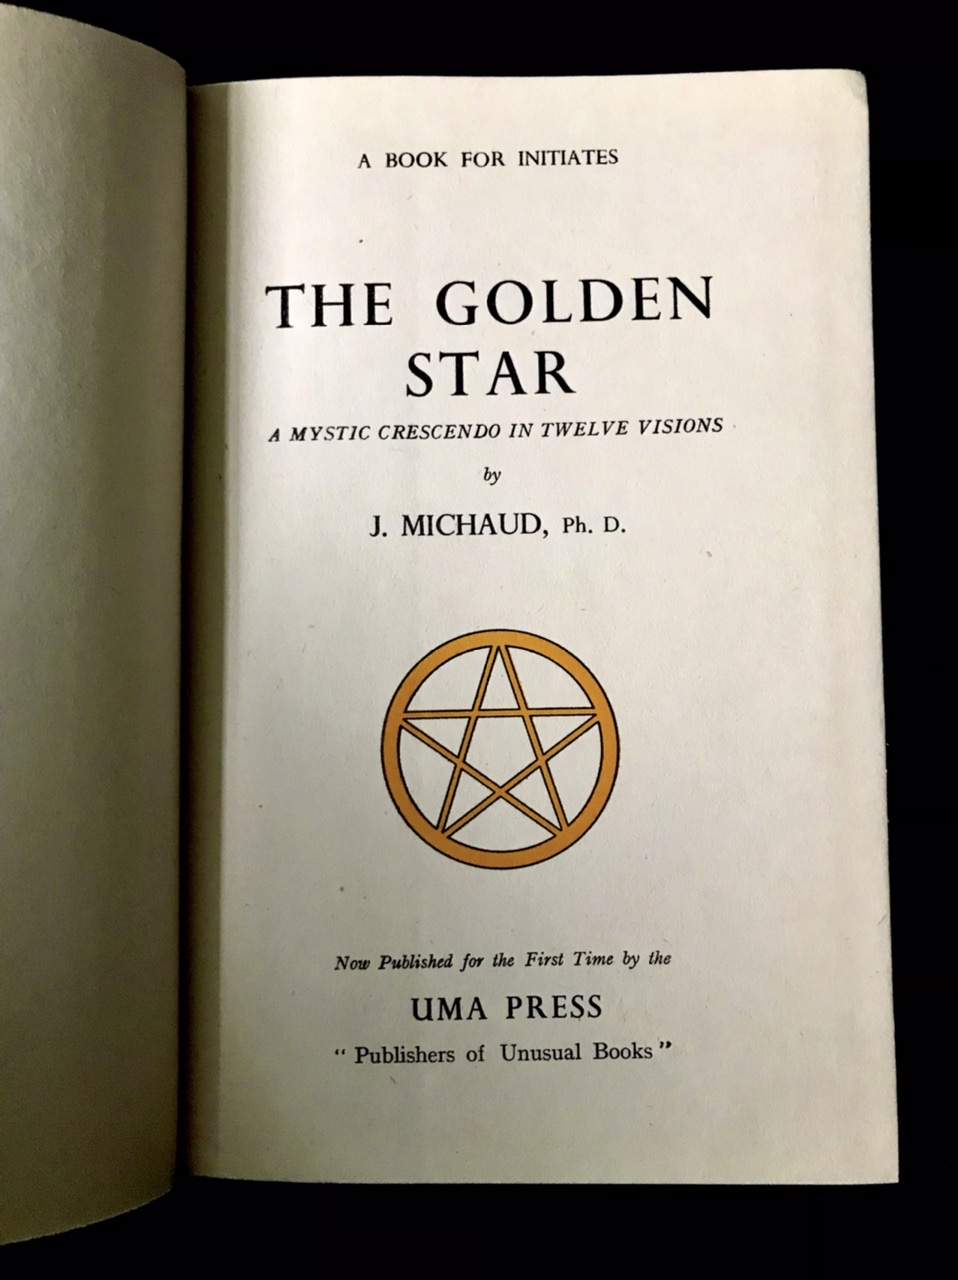 The Golden Star by J. Michaud